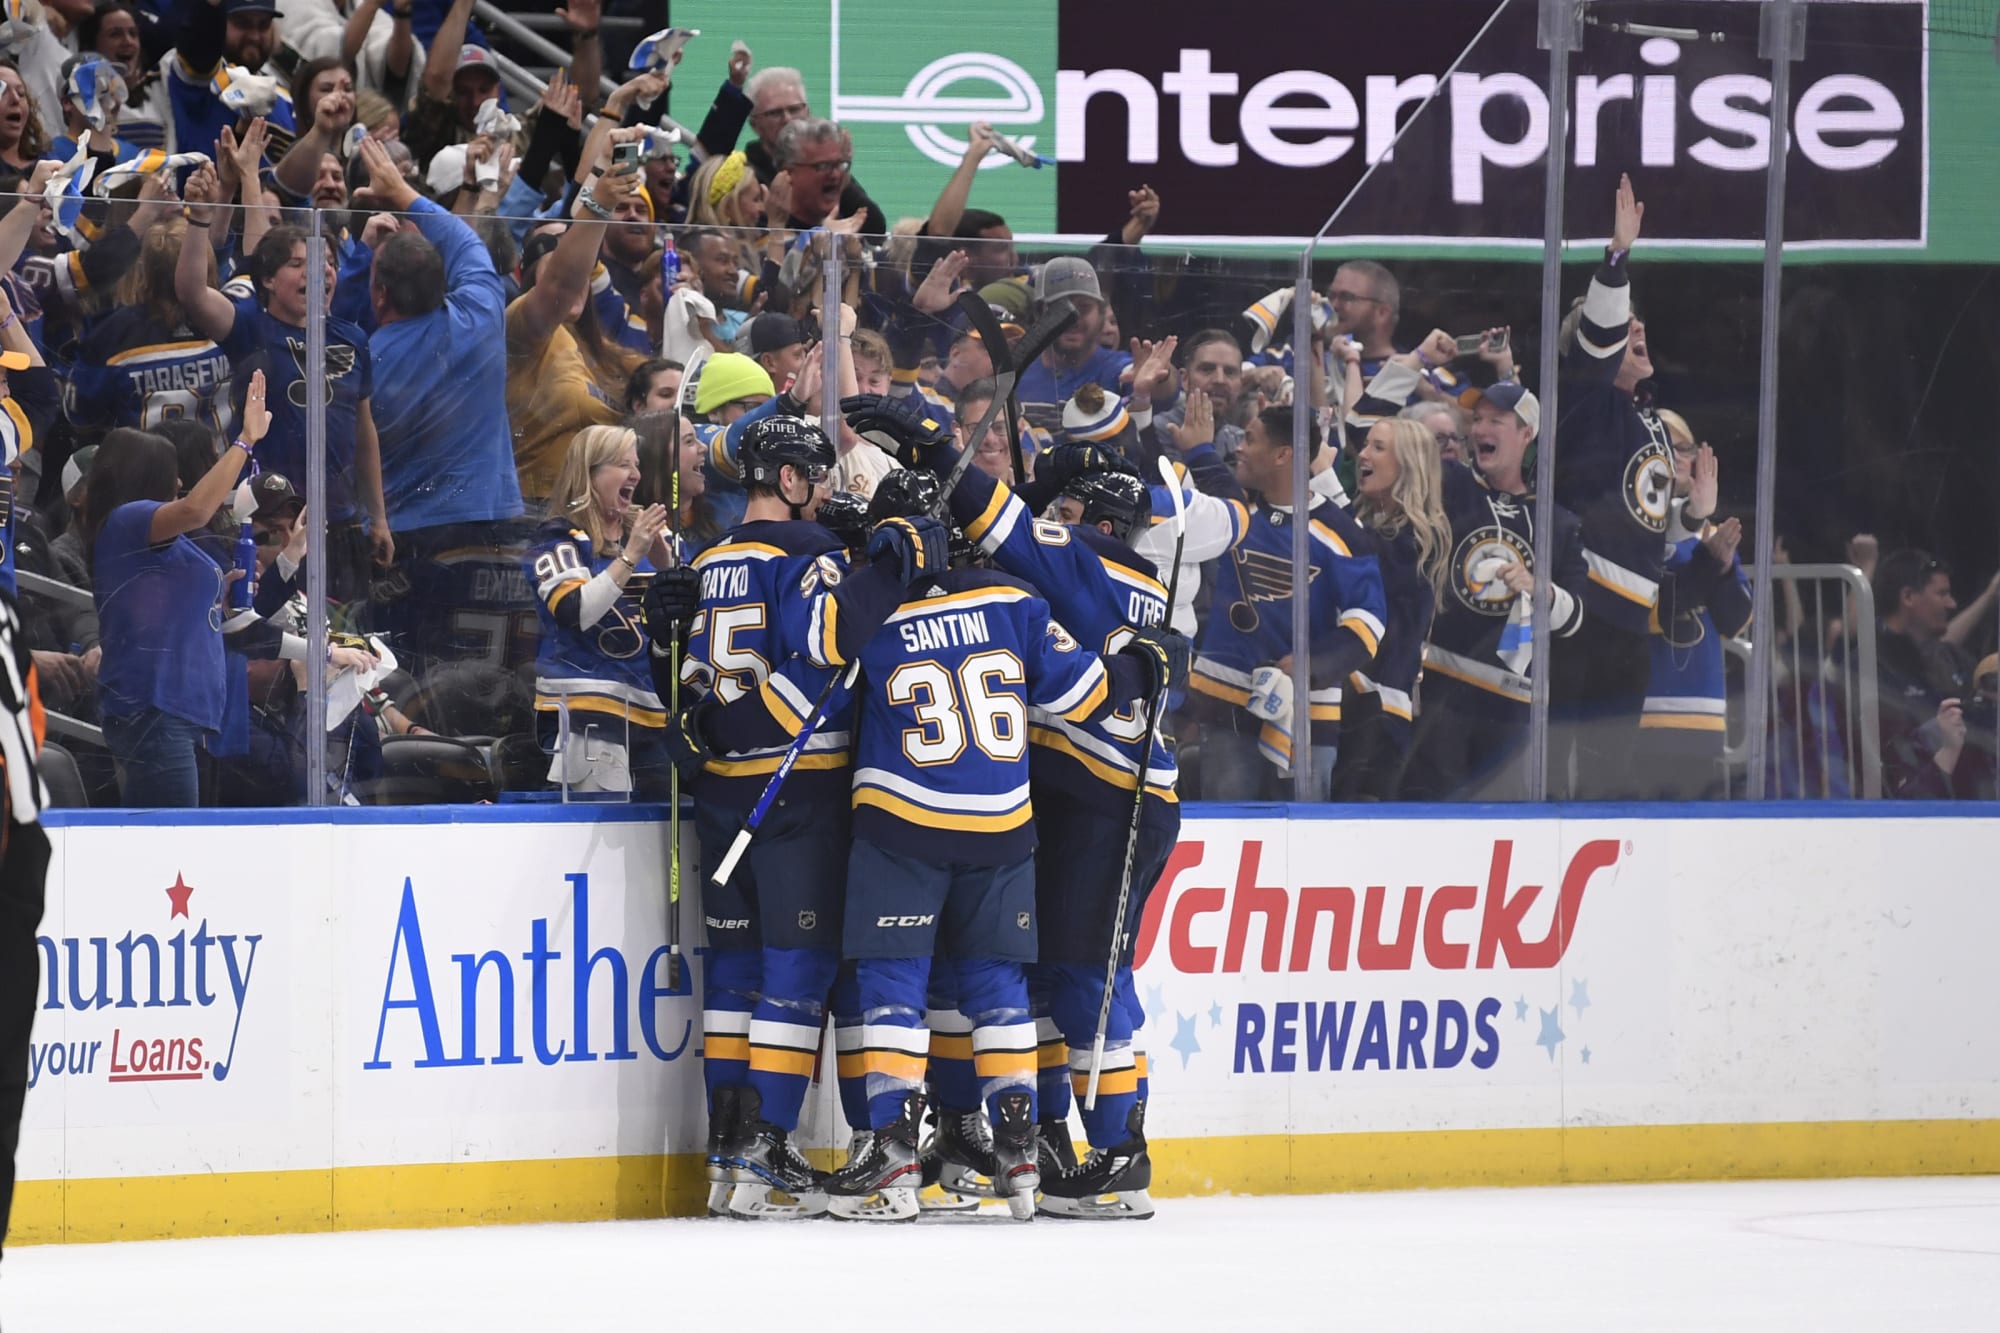 St. Louis Blues on X: Looking for a printable version of the